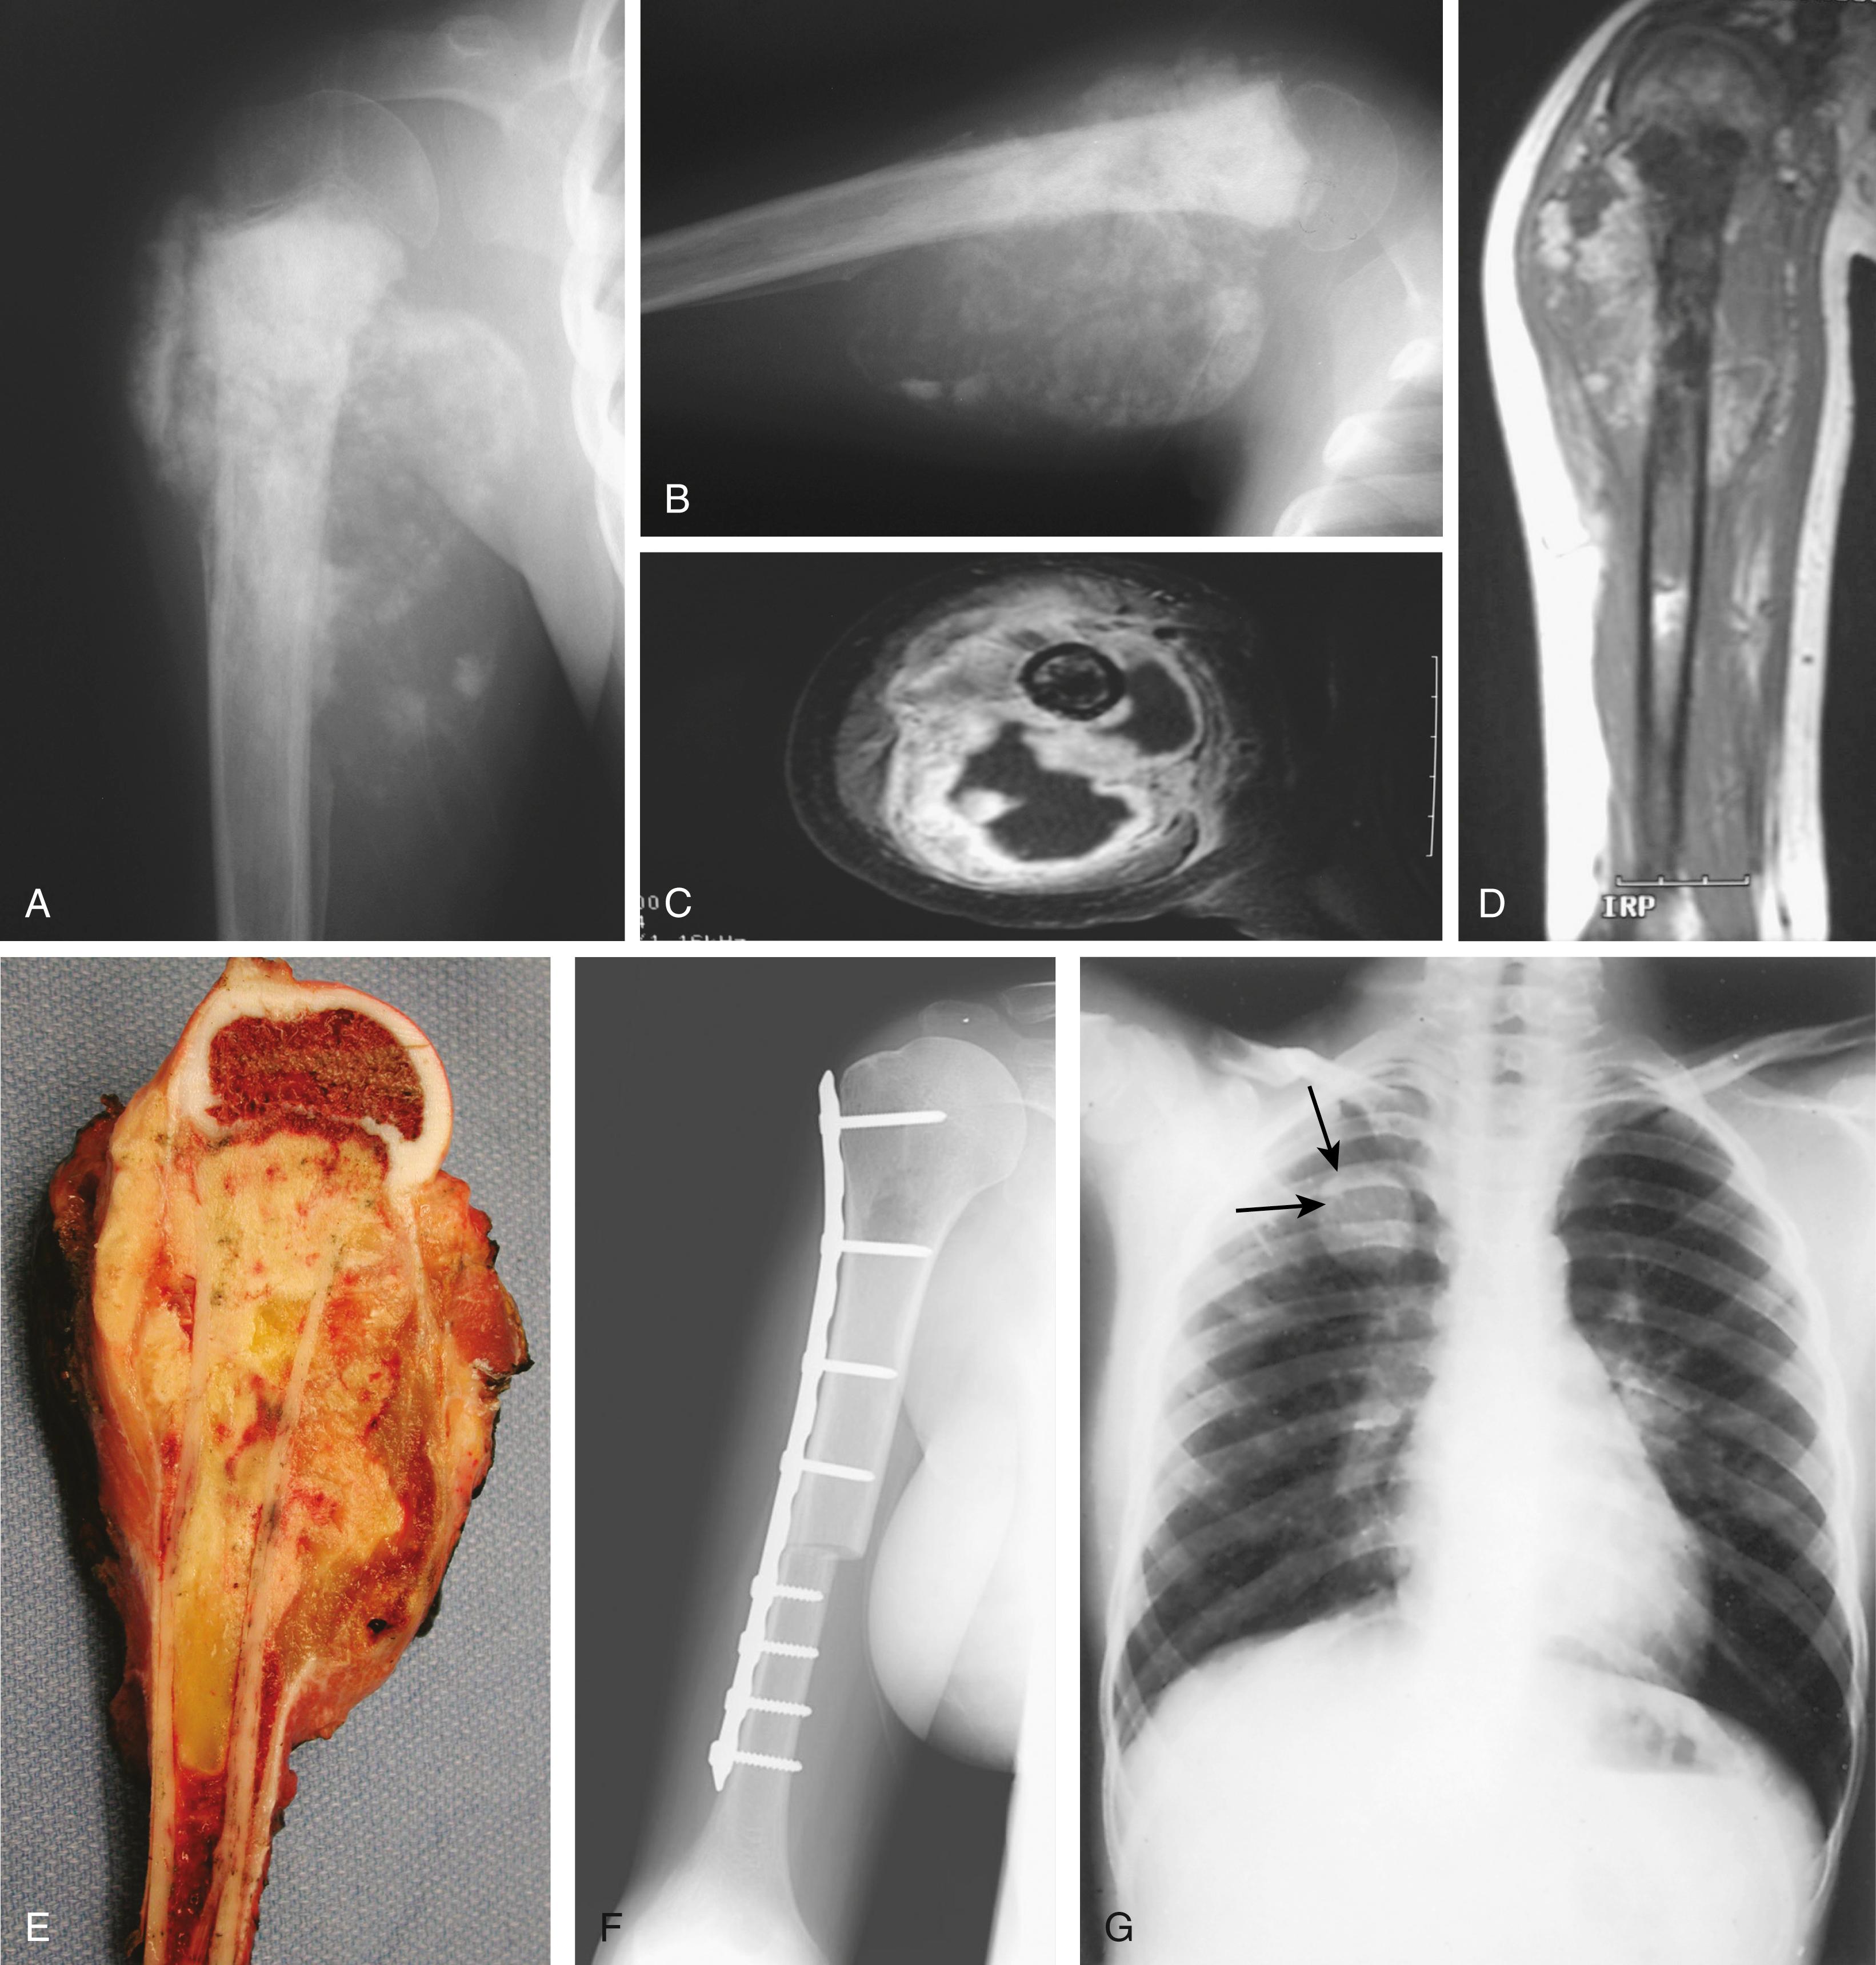 FIG. 26.5, Osteosarcoma of the right proximal humerus in an 8-year-old boy. The patient presented with pain and a mass in his arm. (A and B) Radiographs demonstrate a large mass in the metaphysis abutting the physis. Periosteal elevation and the corresponding Codman’s triangle are seen along the diaphysis. (C and D) MRI allows more precise identification of the local extent of the tumor. Areas of necrosis are seen on the axial section. The extent of the tumor in the medullary cavity can be appreciated on the coronal section. (E) Resection specimen, demonstrating scattered areas of neoplastic bone. (F) Example of proximal humeral allograft reconstruction in a different patient. (G) Example of a lung metastasis (arrows) . MRI , Magnetic resonance imaging.